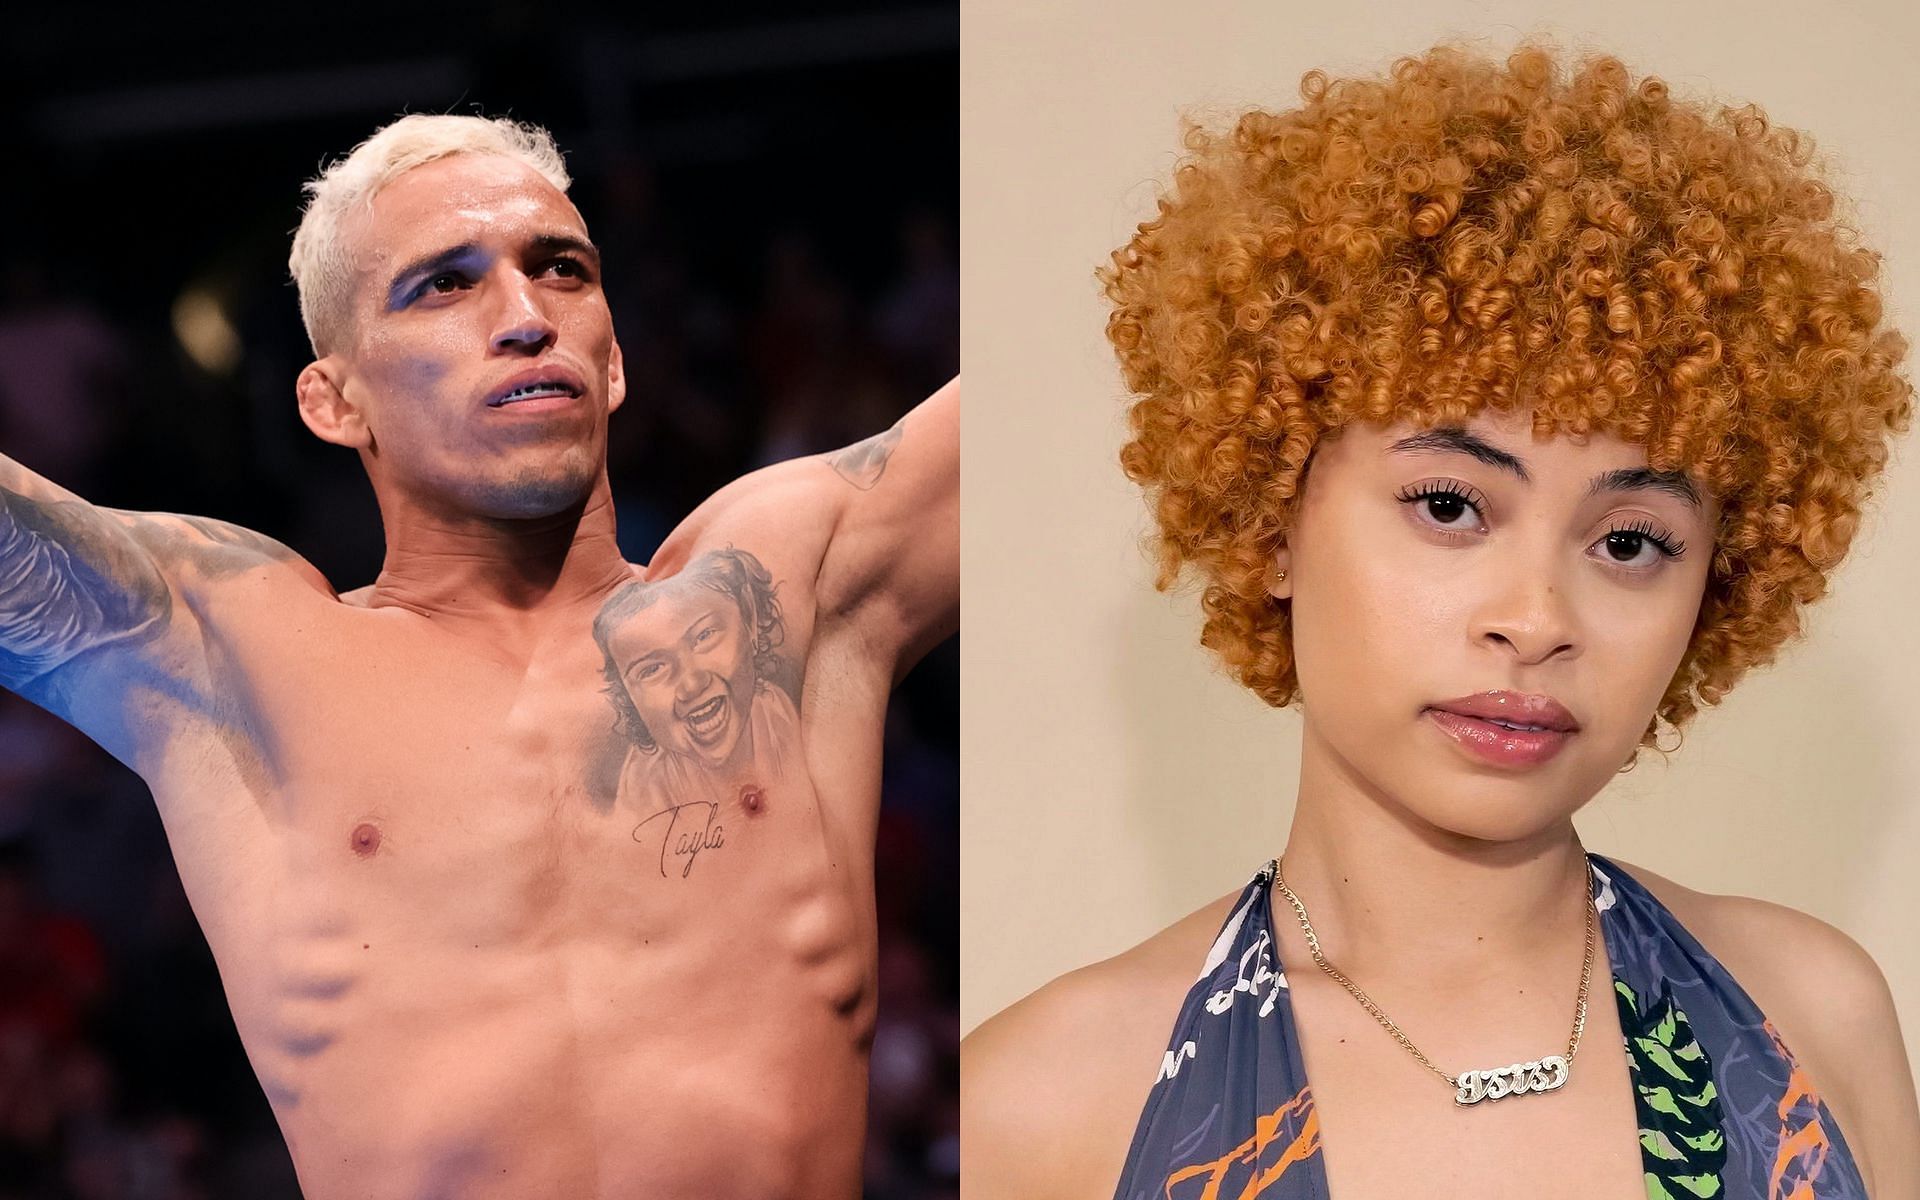 Charles Oliveira and Ice Spice [Image credits getty Images and @lilMoonLambo on Twitter]